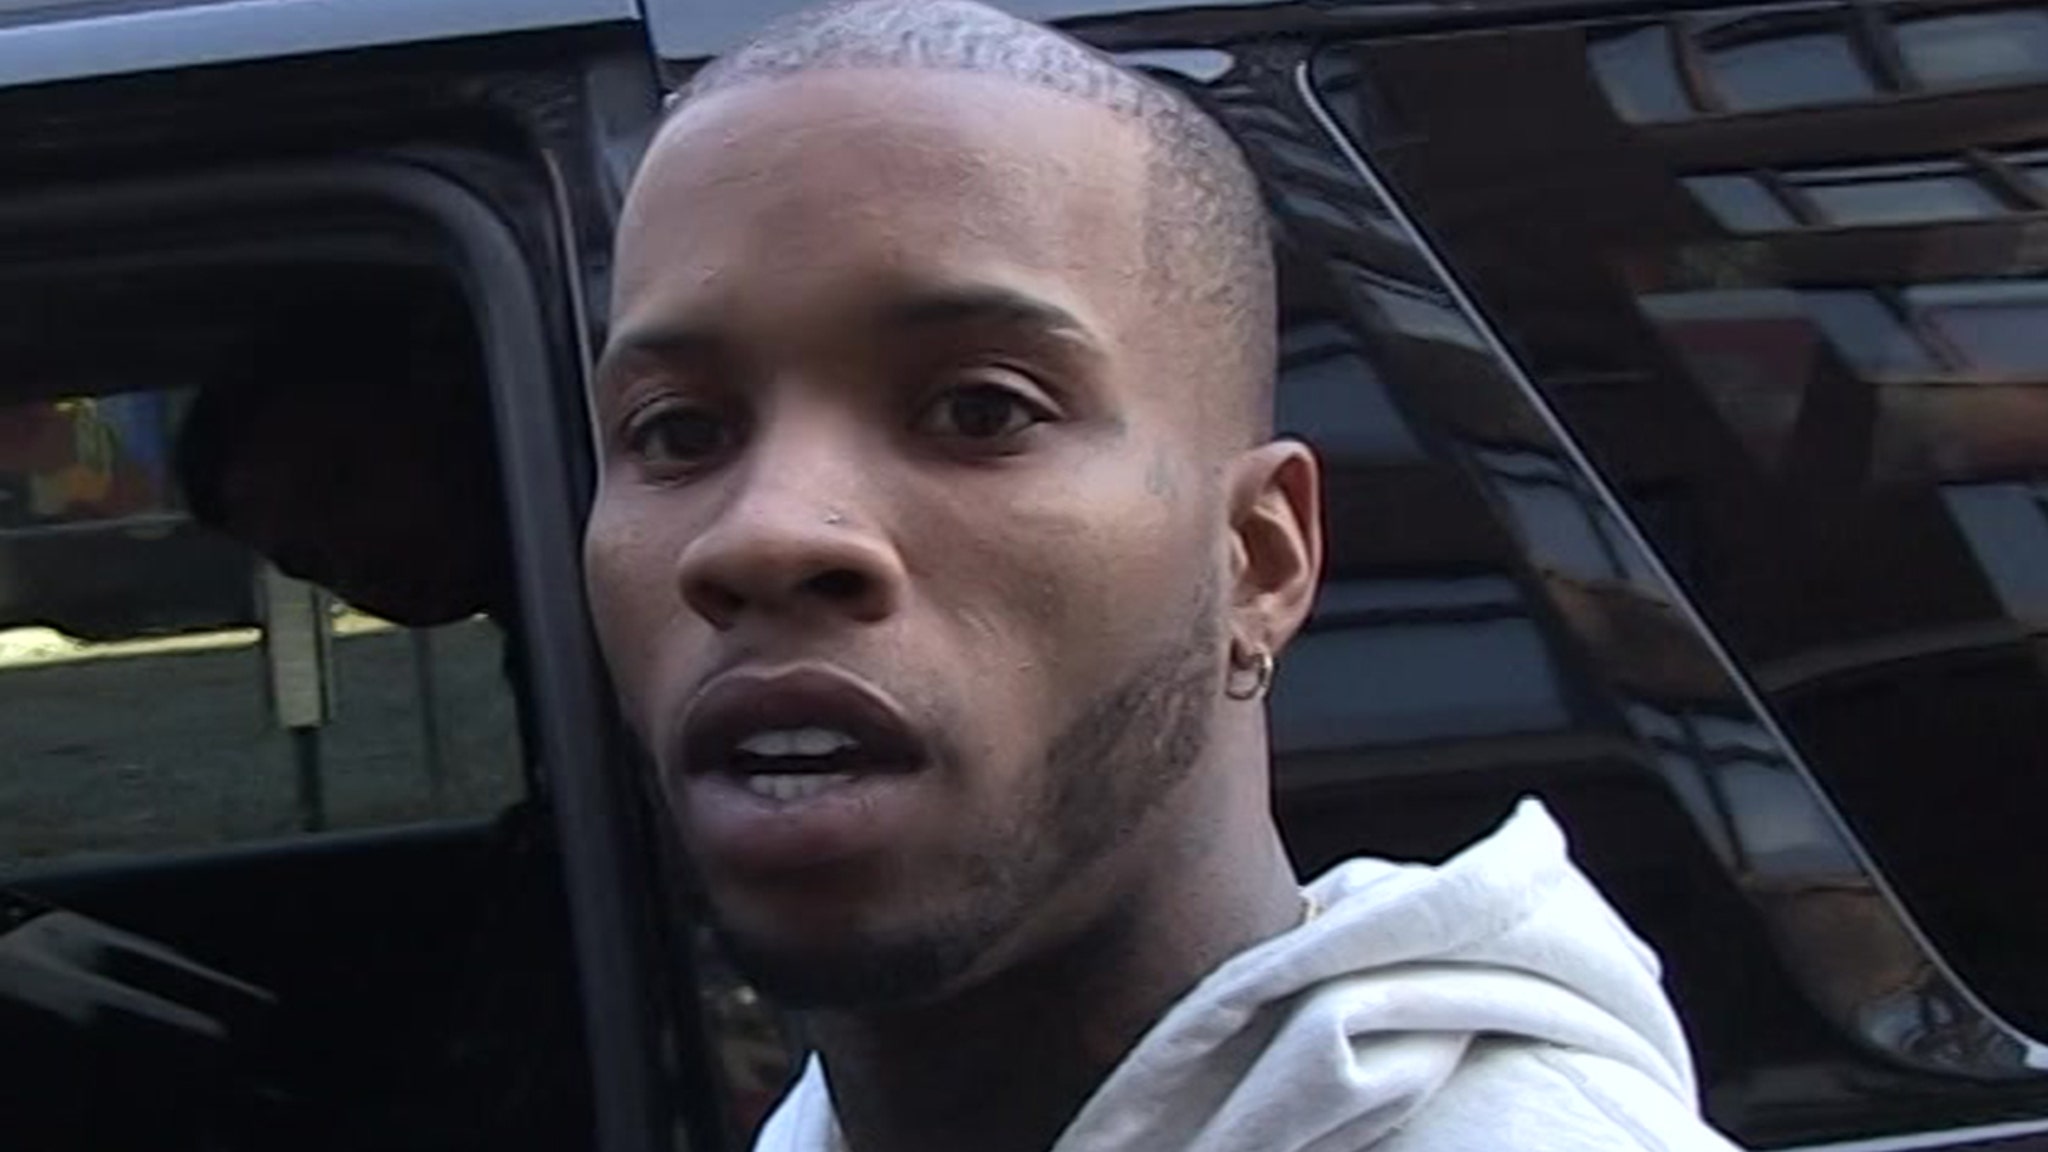 Tory Lanez Says He Has Nothing to Apologize About Filming Megan Thee Stallion